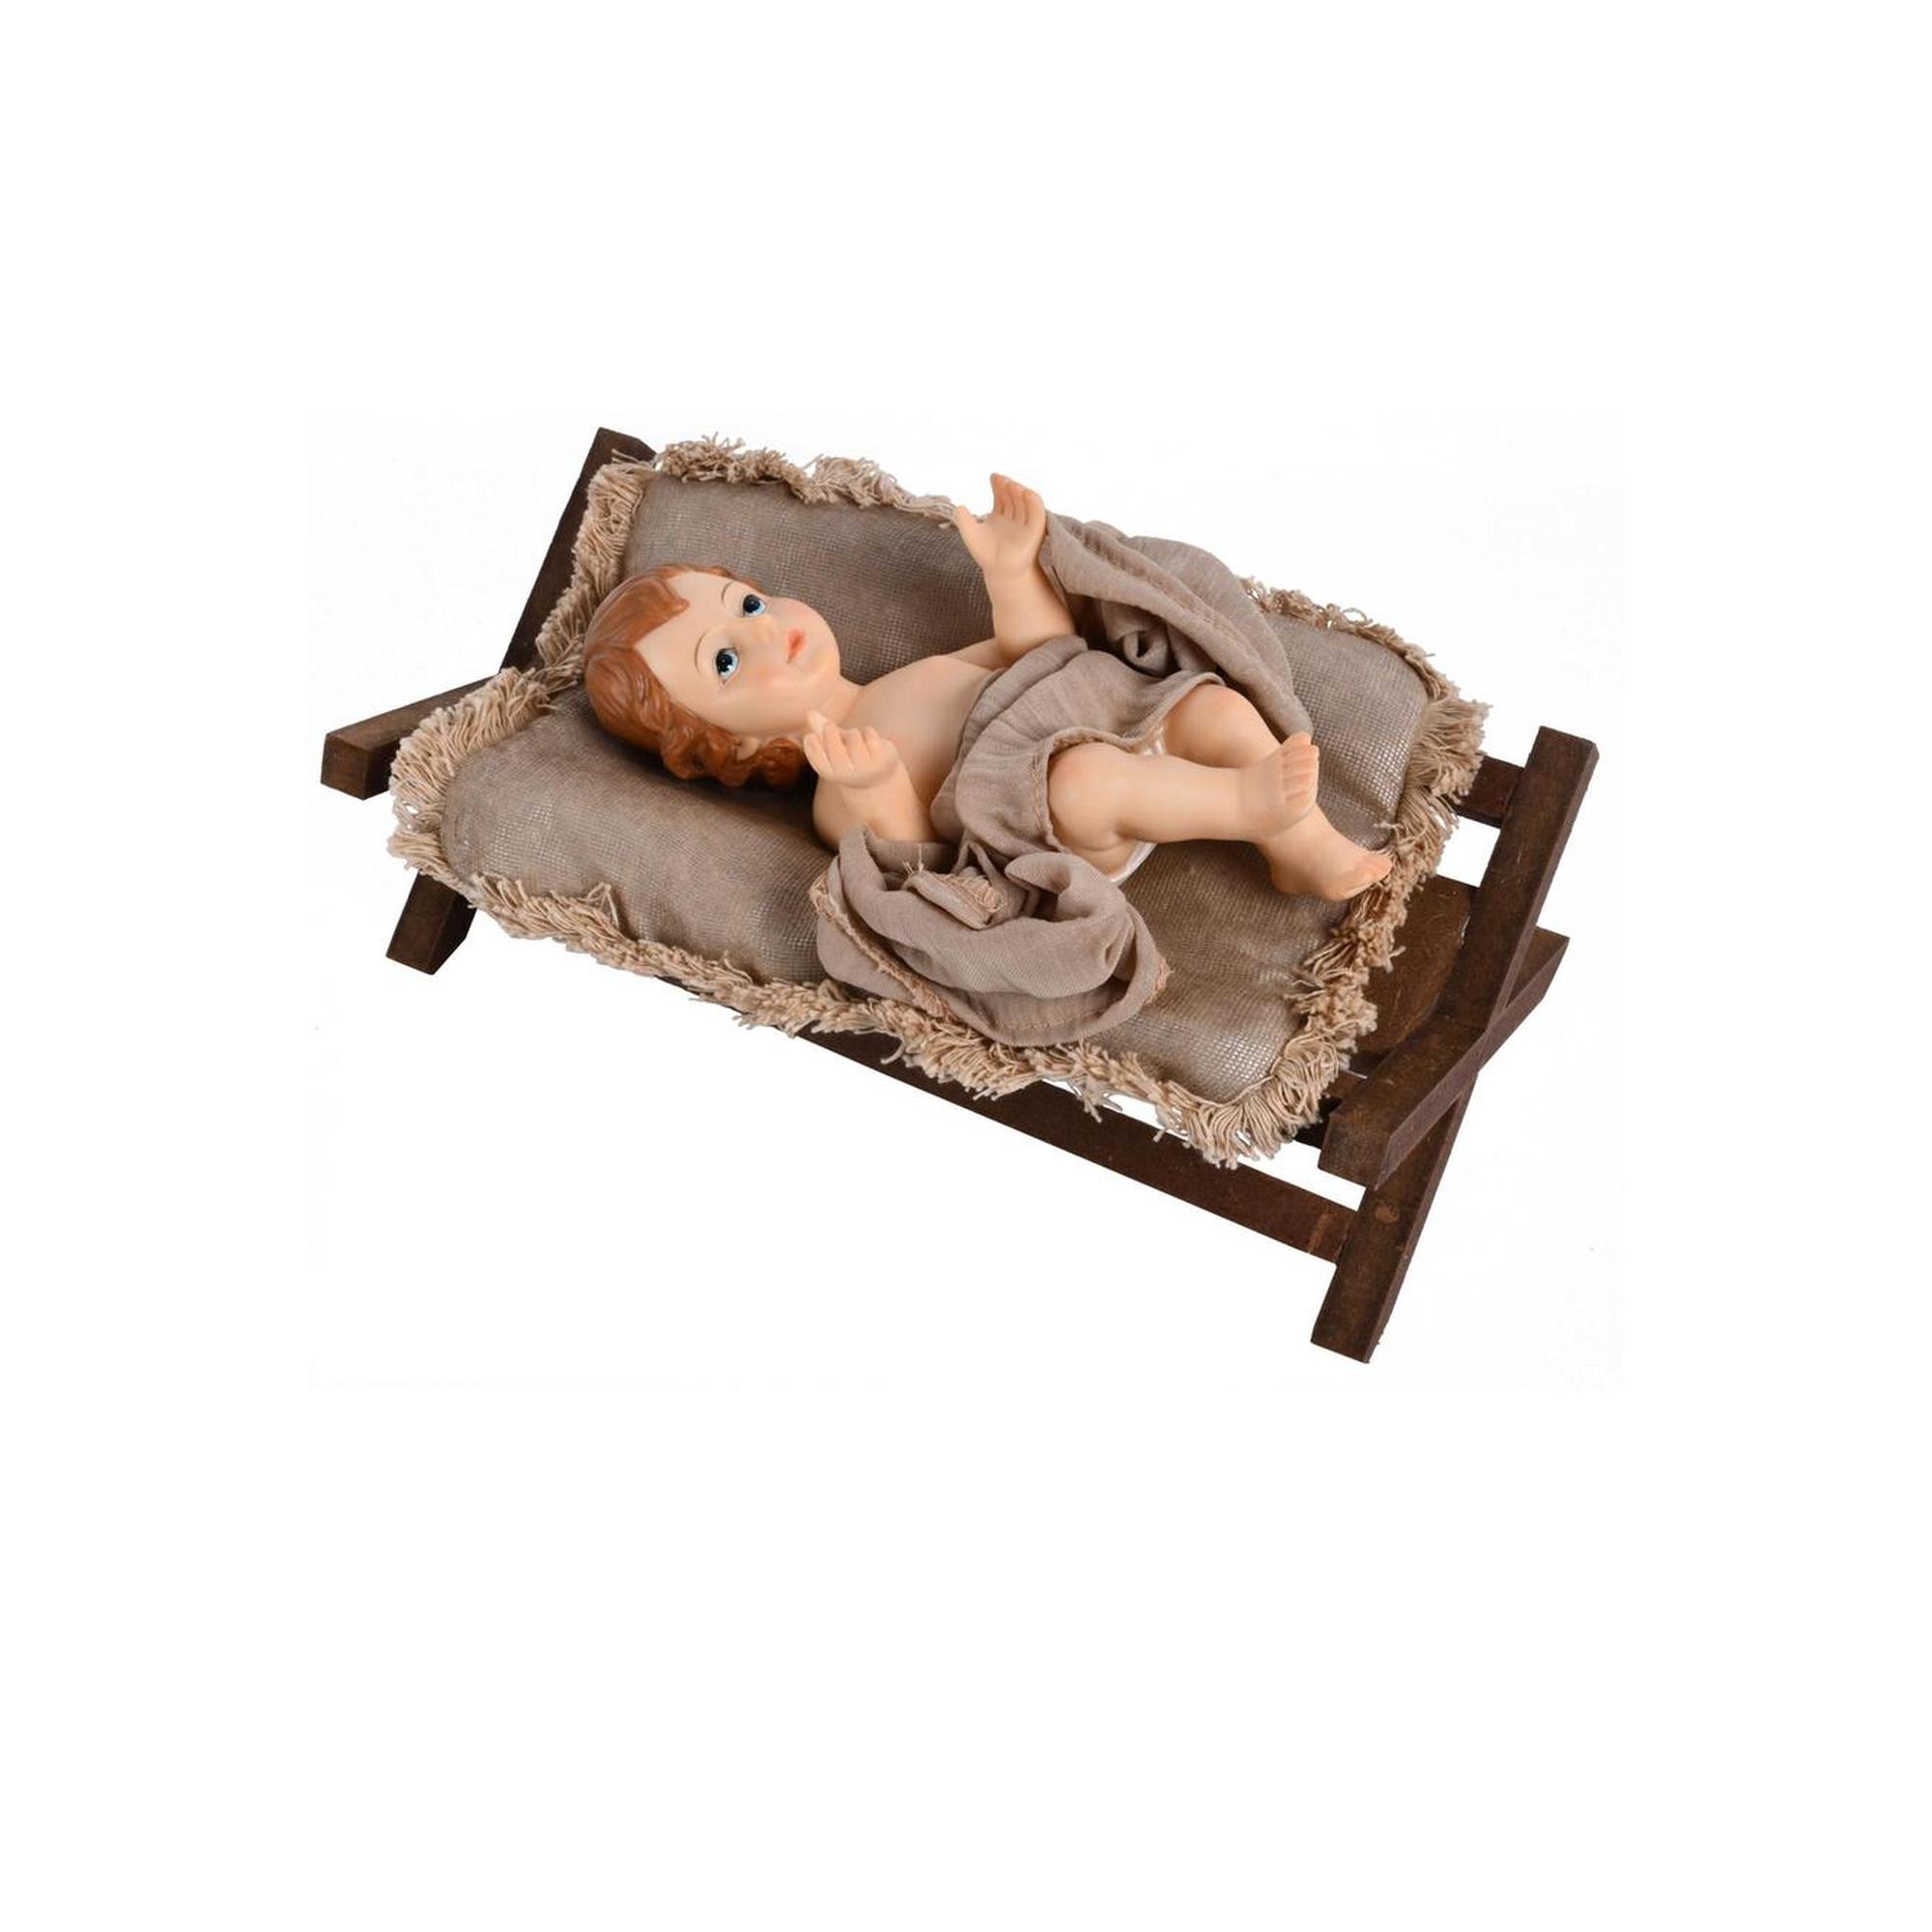 FIG BABY JESUS 9 inches - 100-4900193